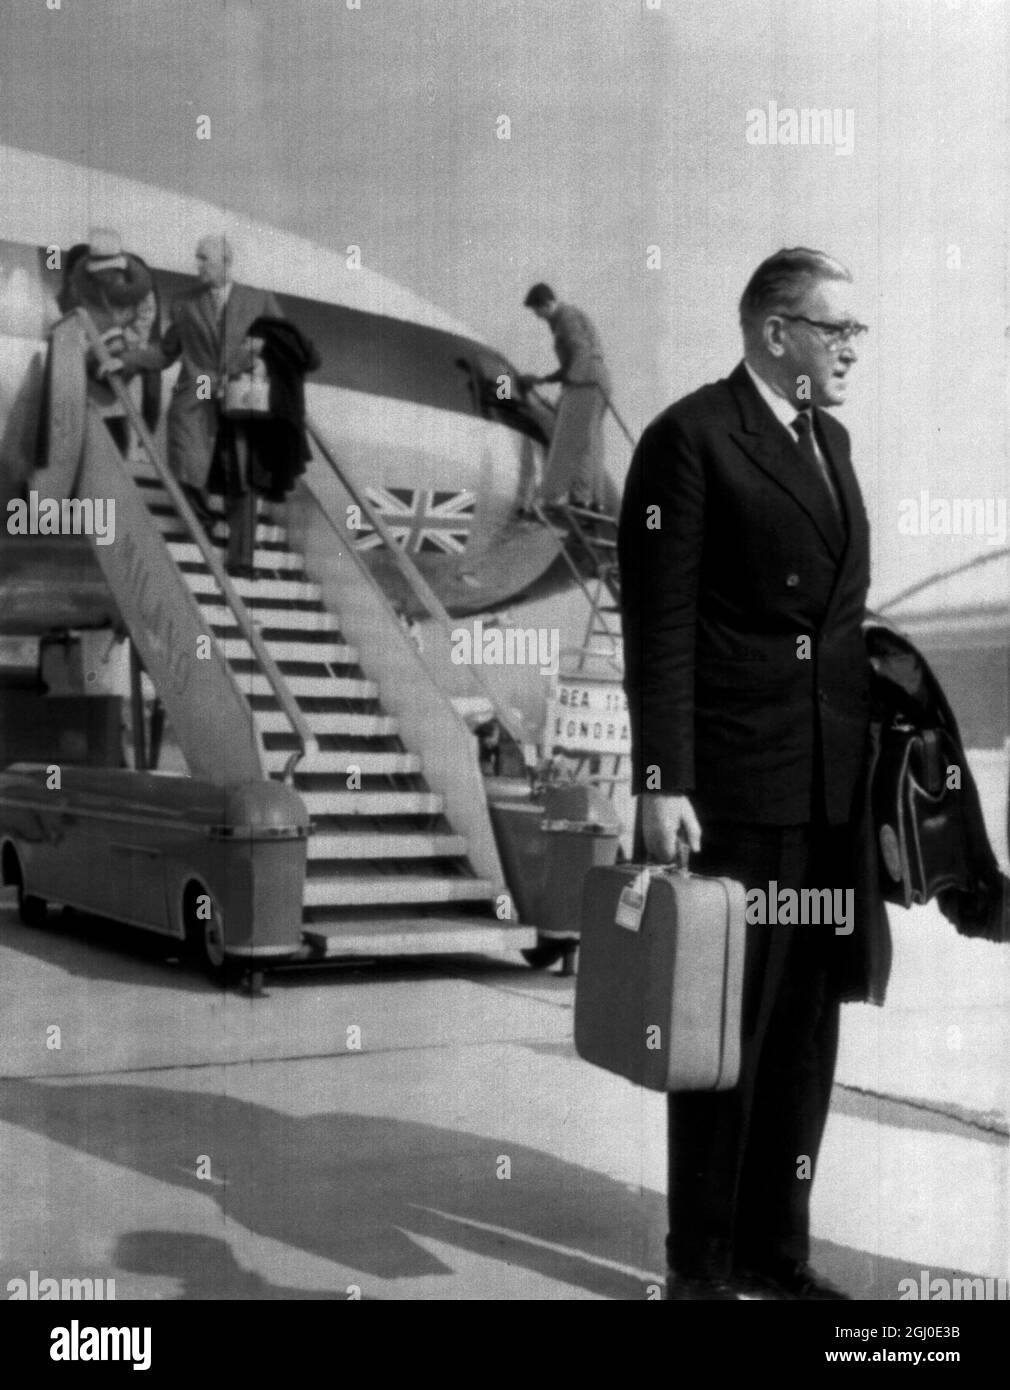 Mr Joe Mears, chairman of Chelsea Football Club, as he arrived at Milan airport, to start direct talks with Milan soccer club over the transfer of Chelsea's former England forward Jimmy Greaves. 23rd October 1961. Stock Photo